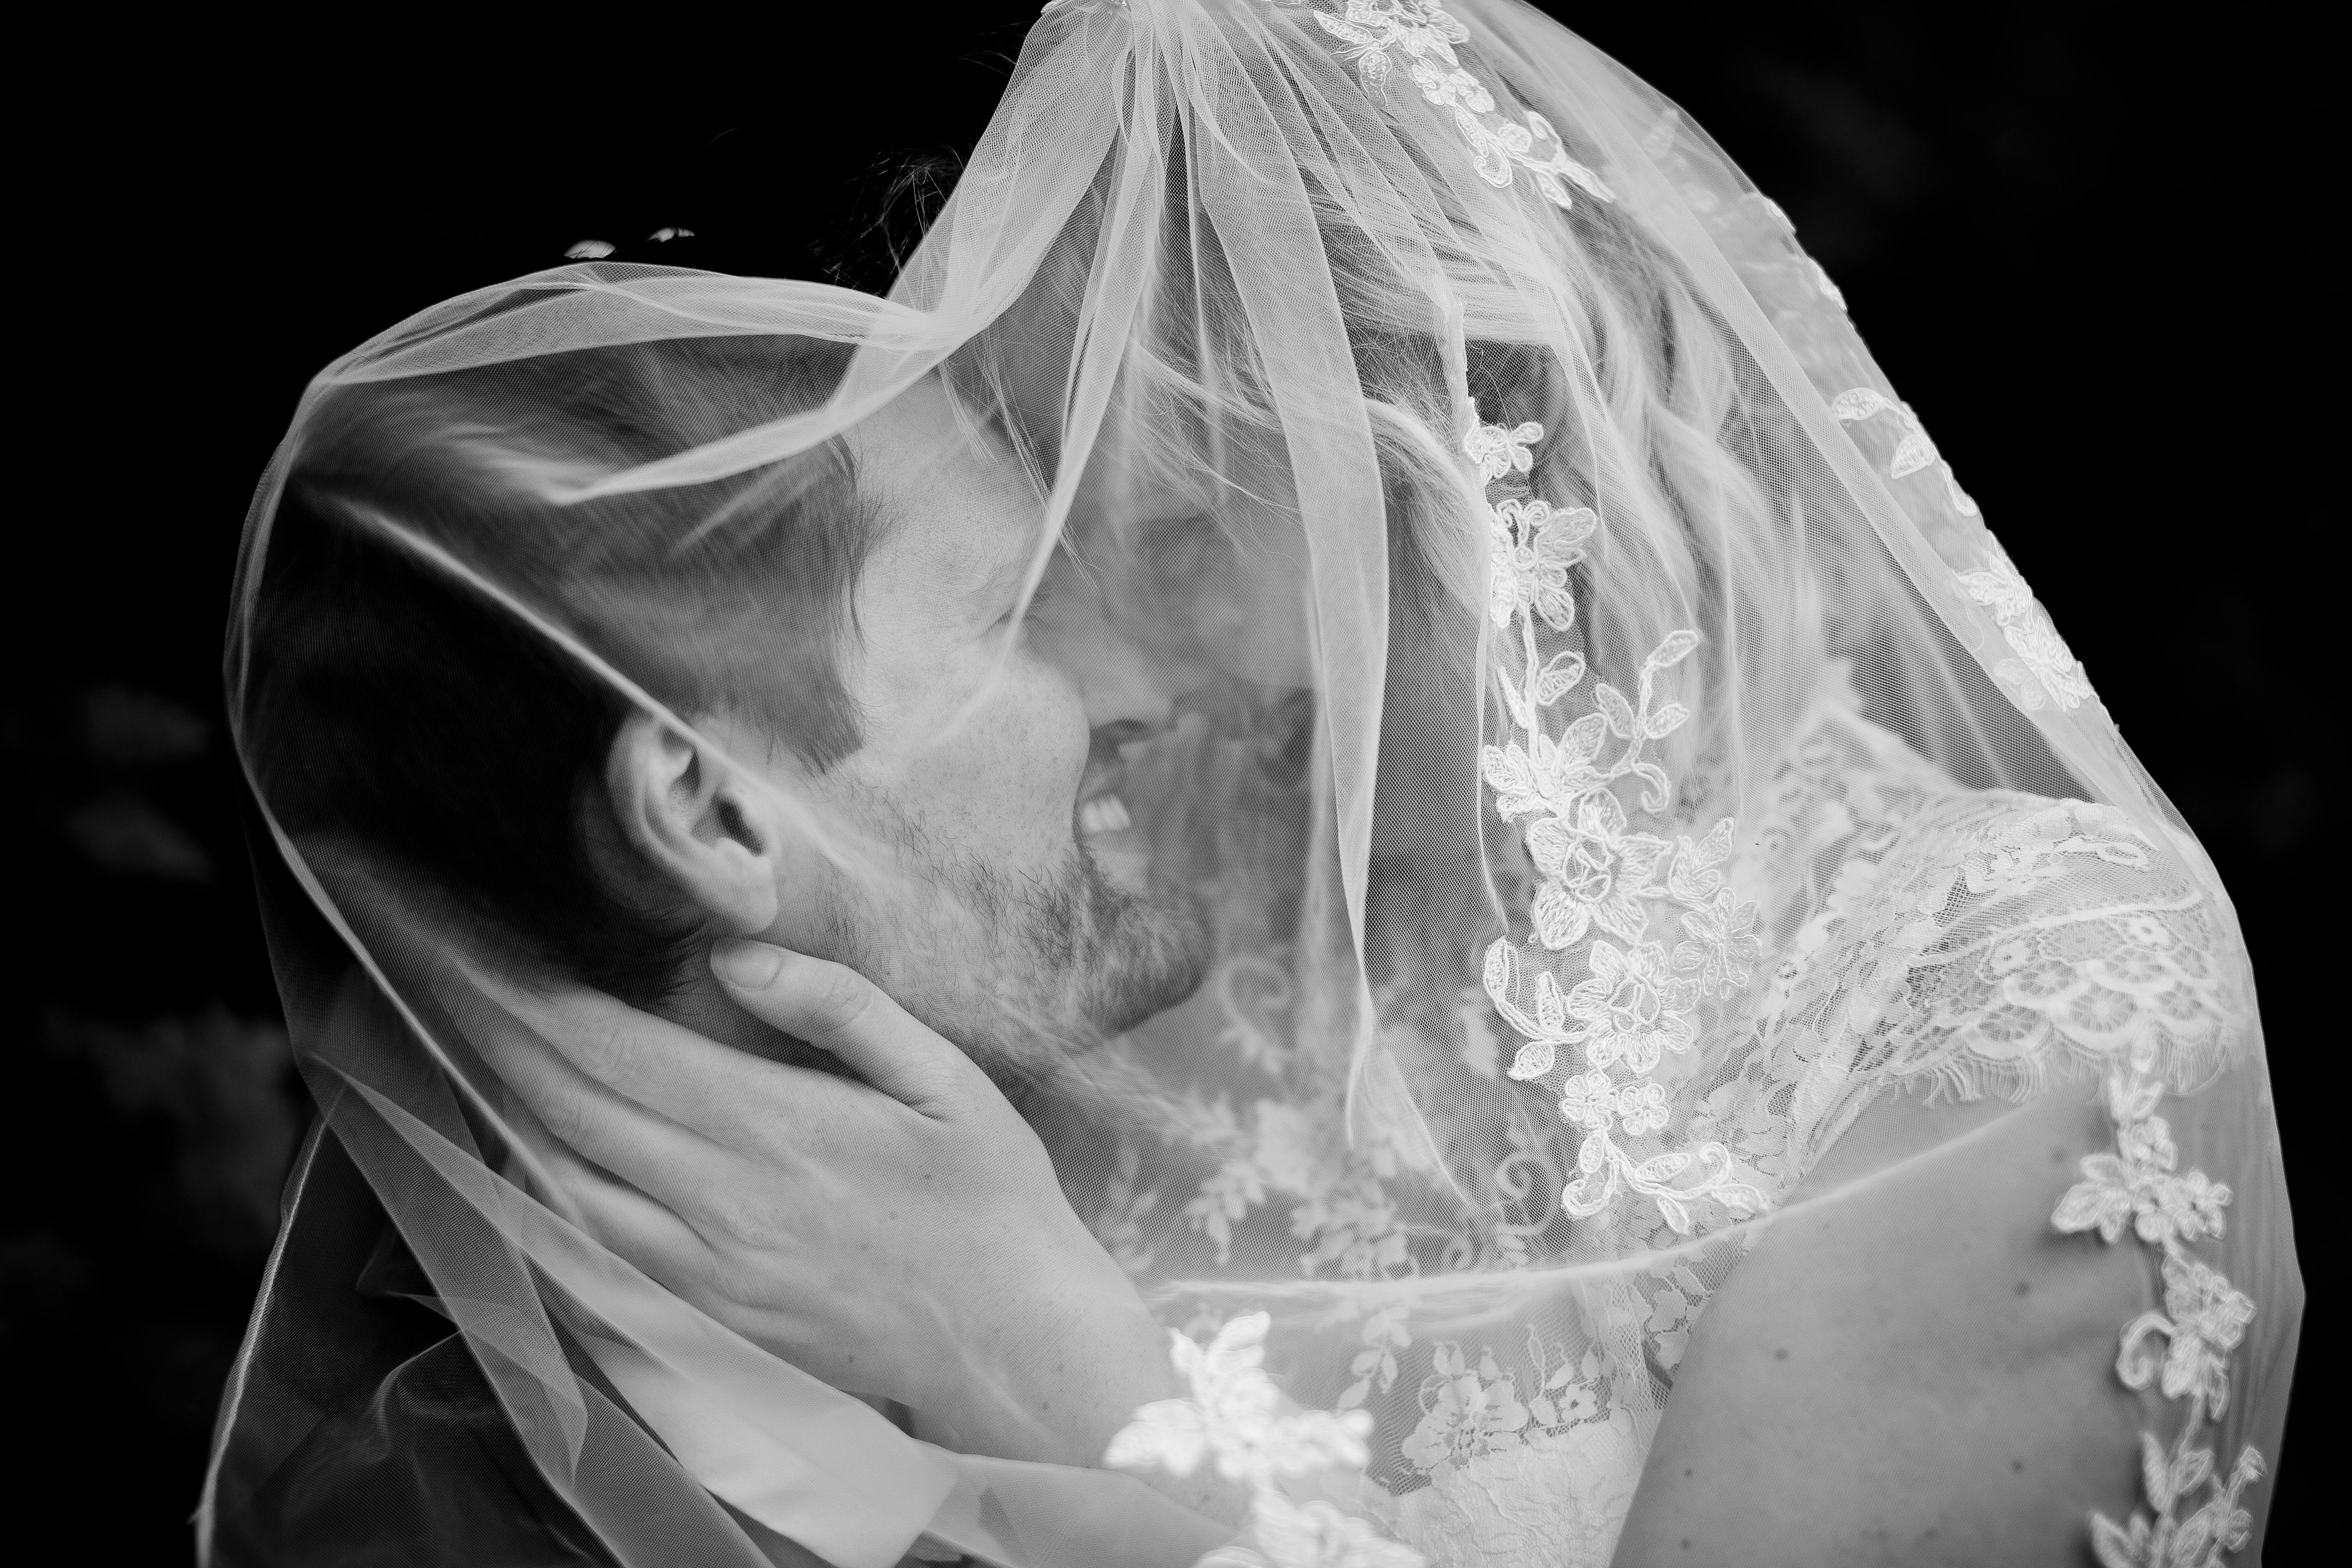 Black and white photo of a newly married couple | Source: Pexels